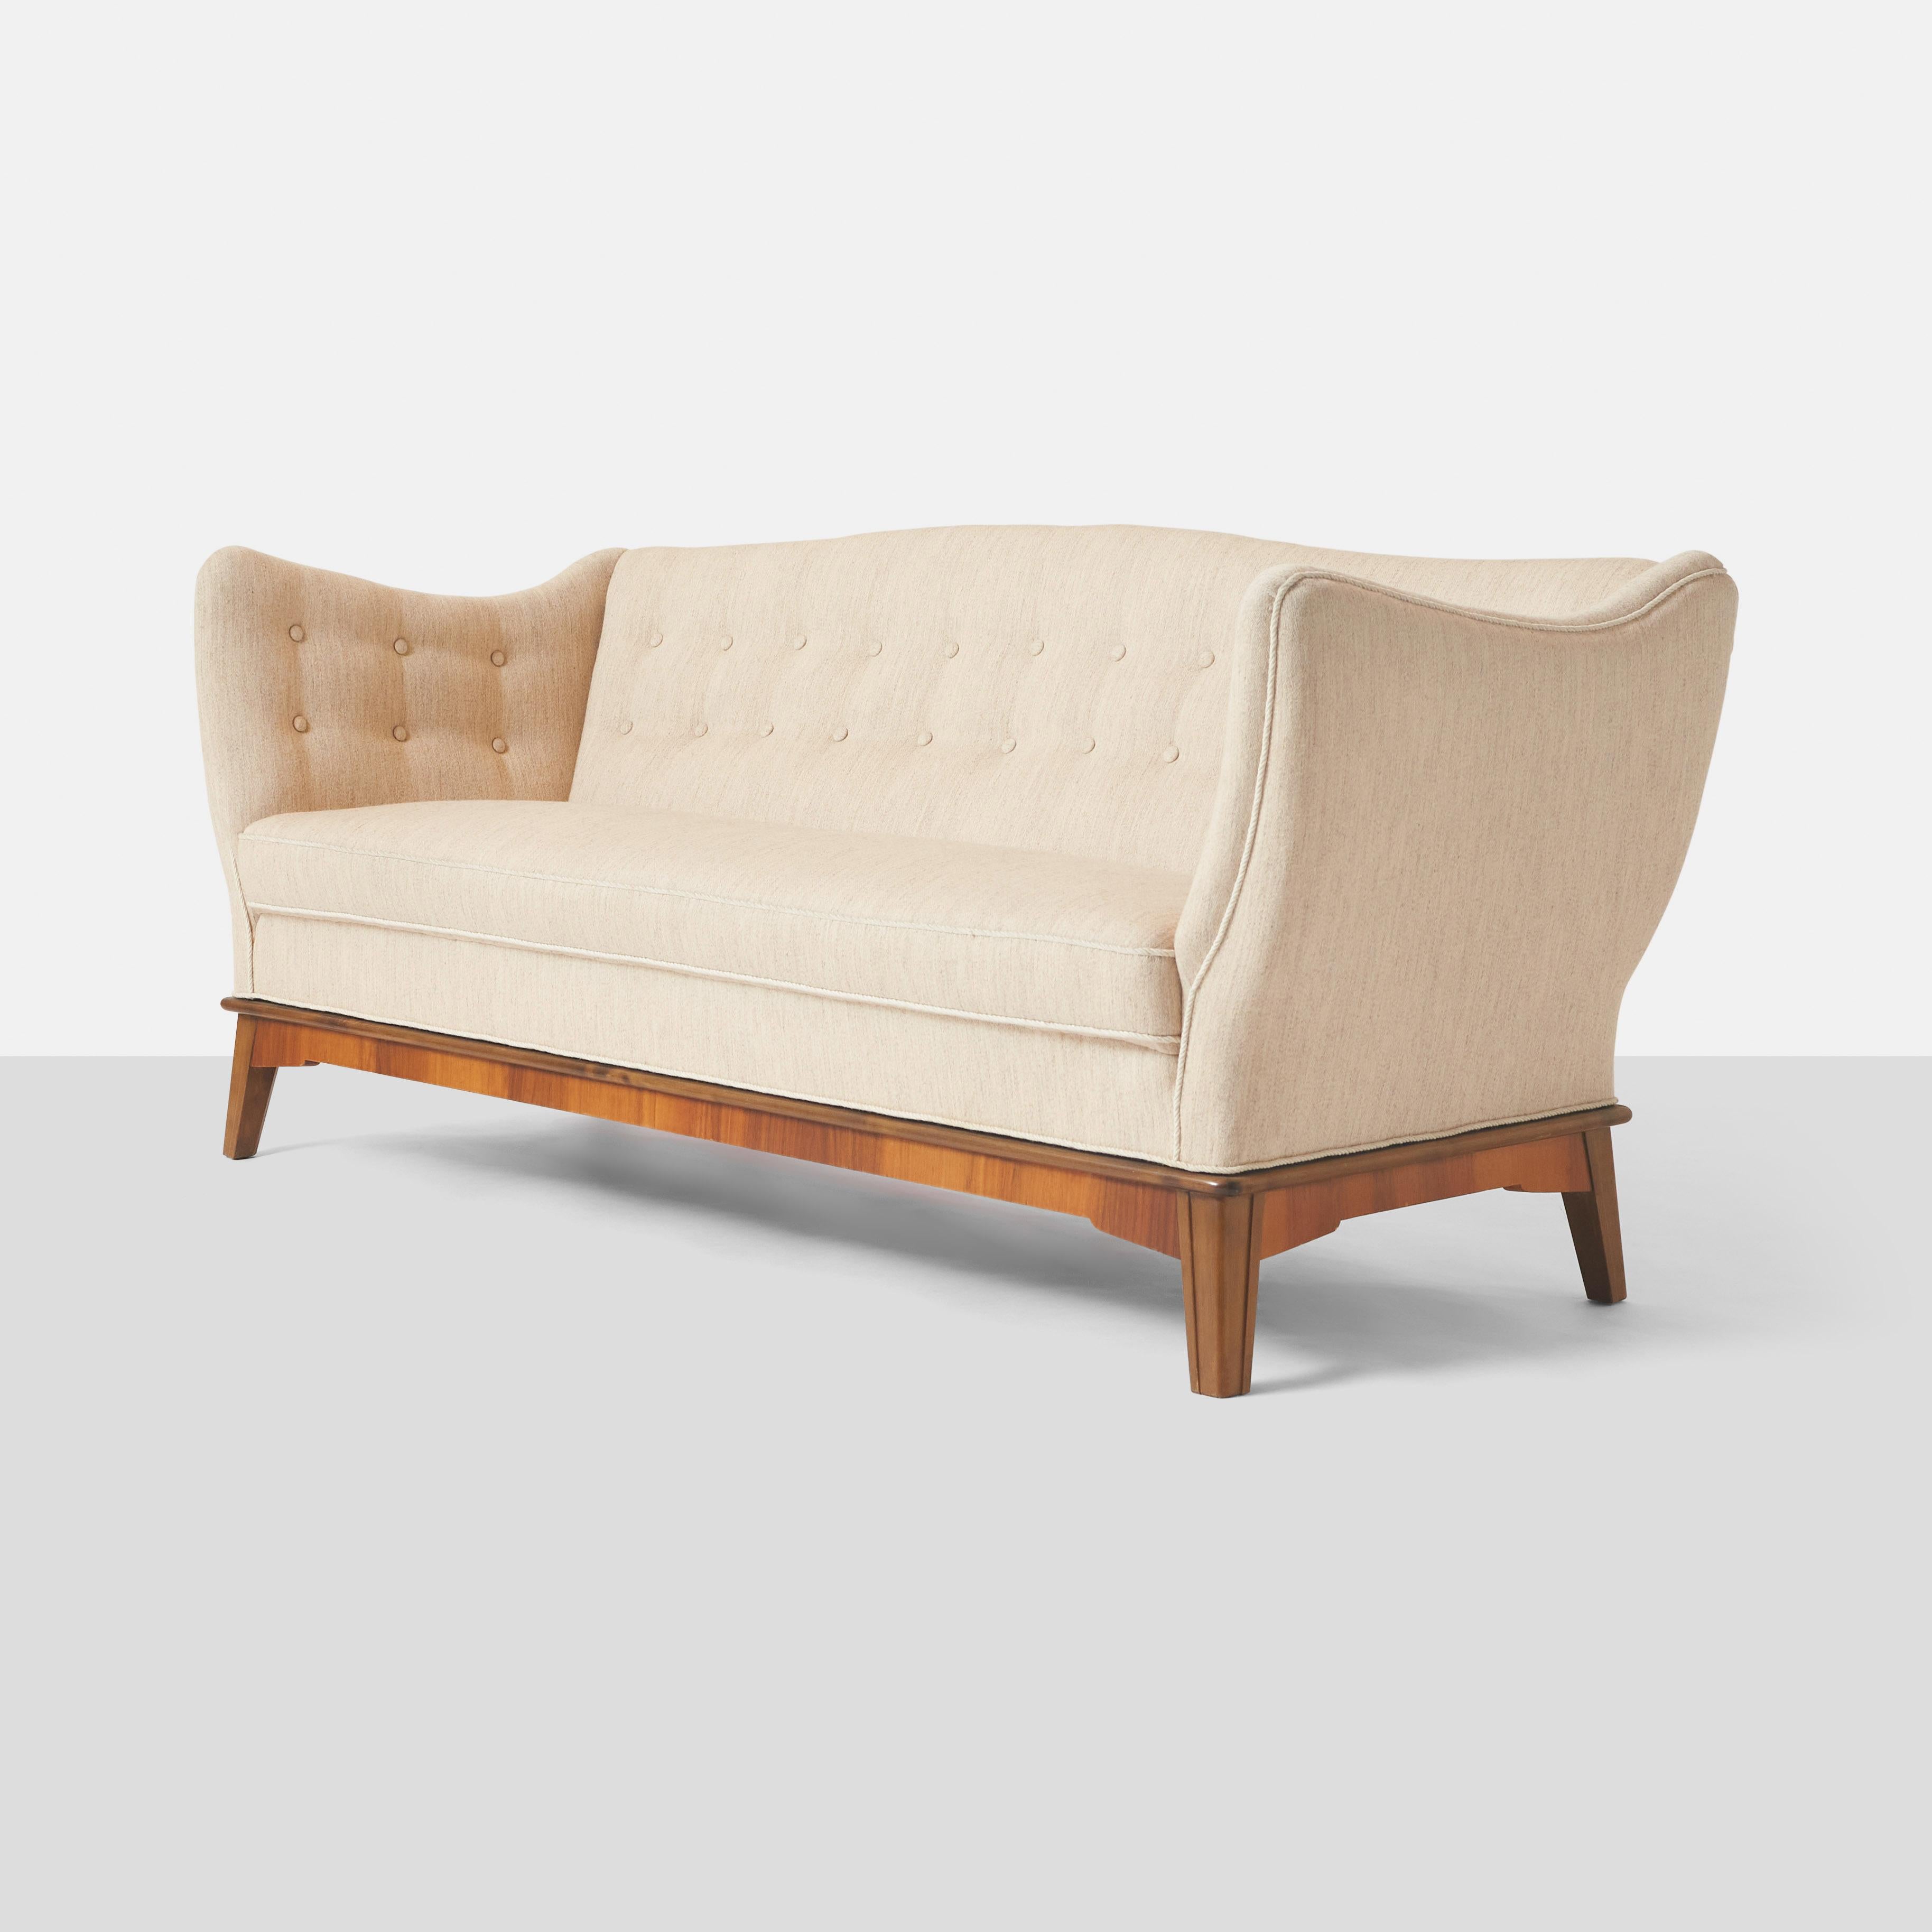 A three seat sofa designed by Stig Thoresen-Lassen and created by master cabinetmaker Louis G Thiersen. The base is made of mahogany and the body is covered in a beige wool. The sofa has a tight seat with tufting to the insides of the high arm rests